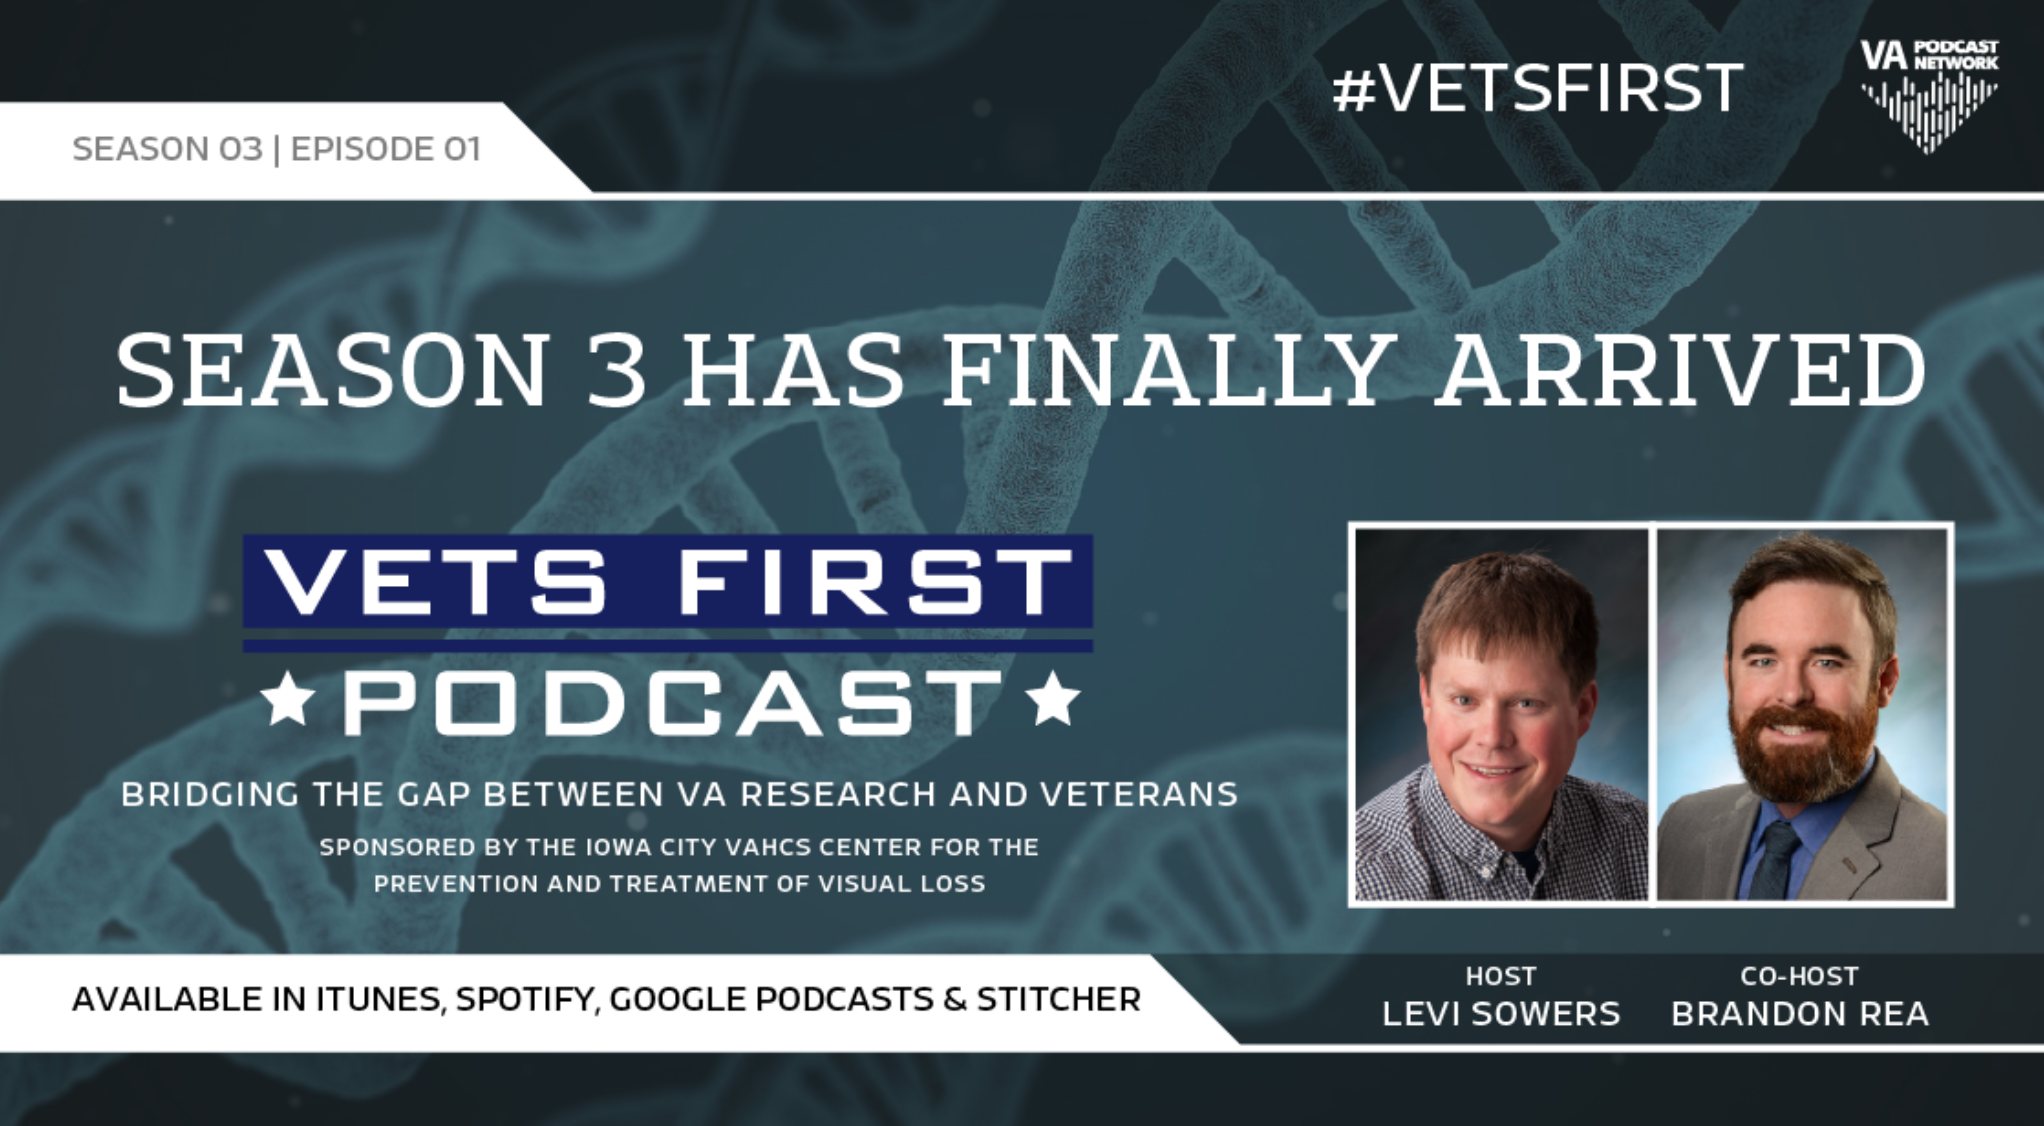 In the opening of season three of Vets First Podcast, Levi and Brandon breakdown this season's theme.